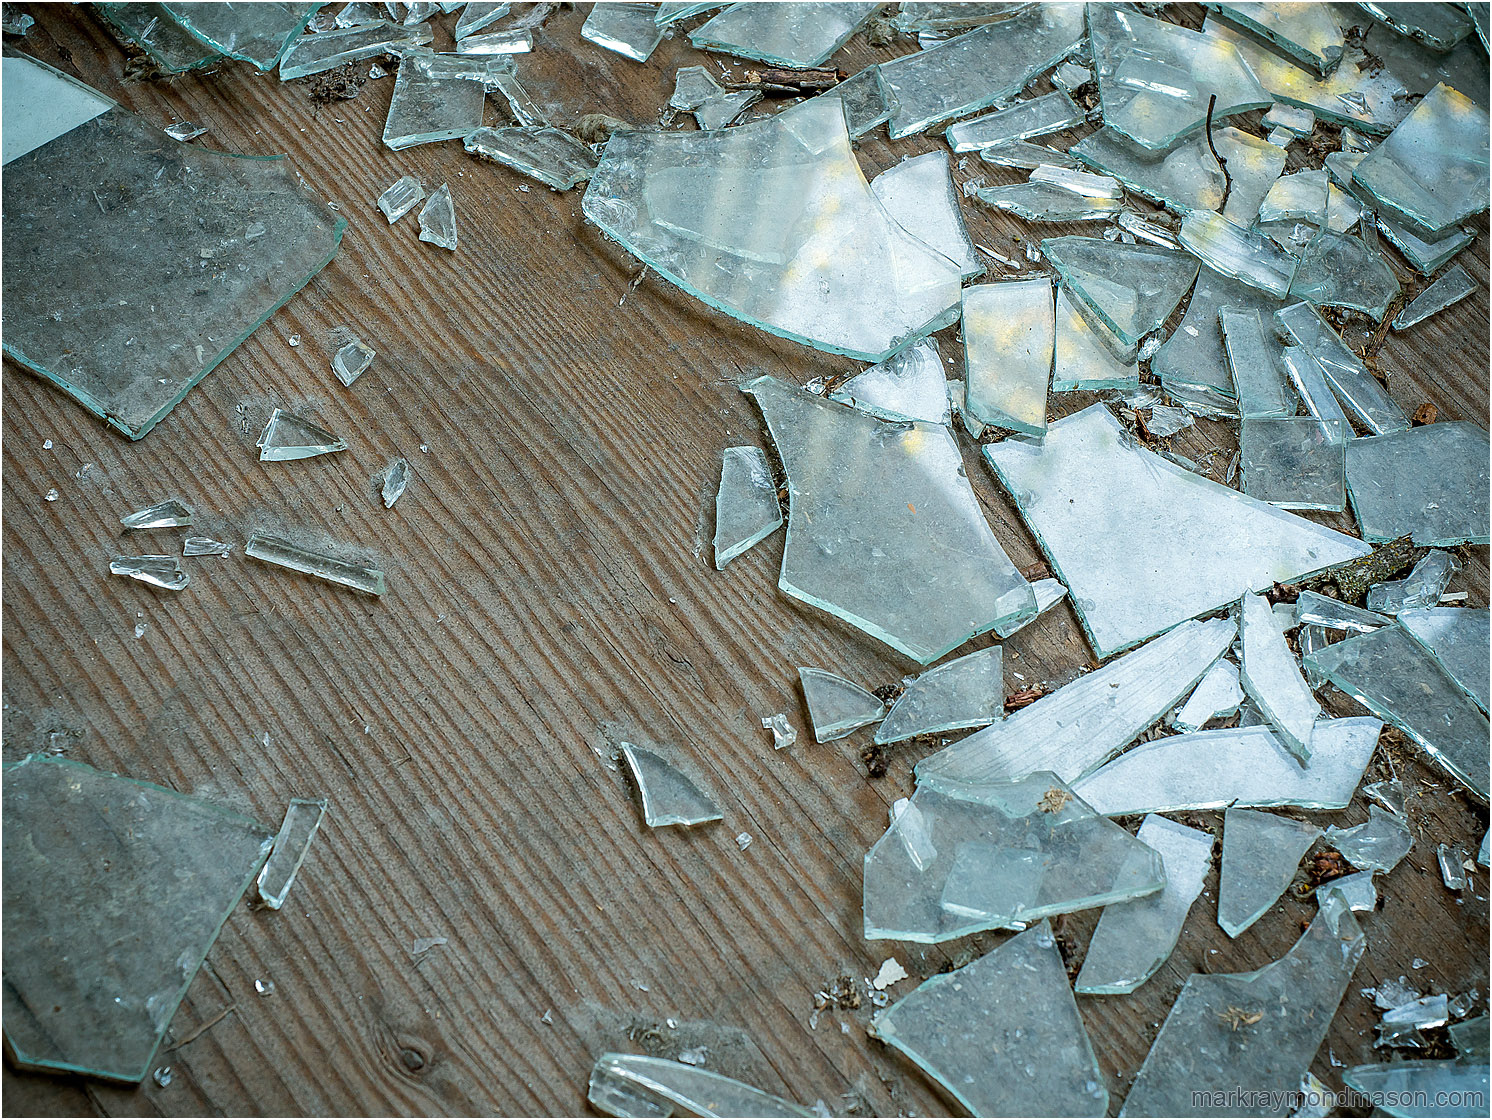 Plywood Floor, Shattered Glass, Highlights: Near Chase, BC - Mark